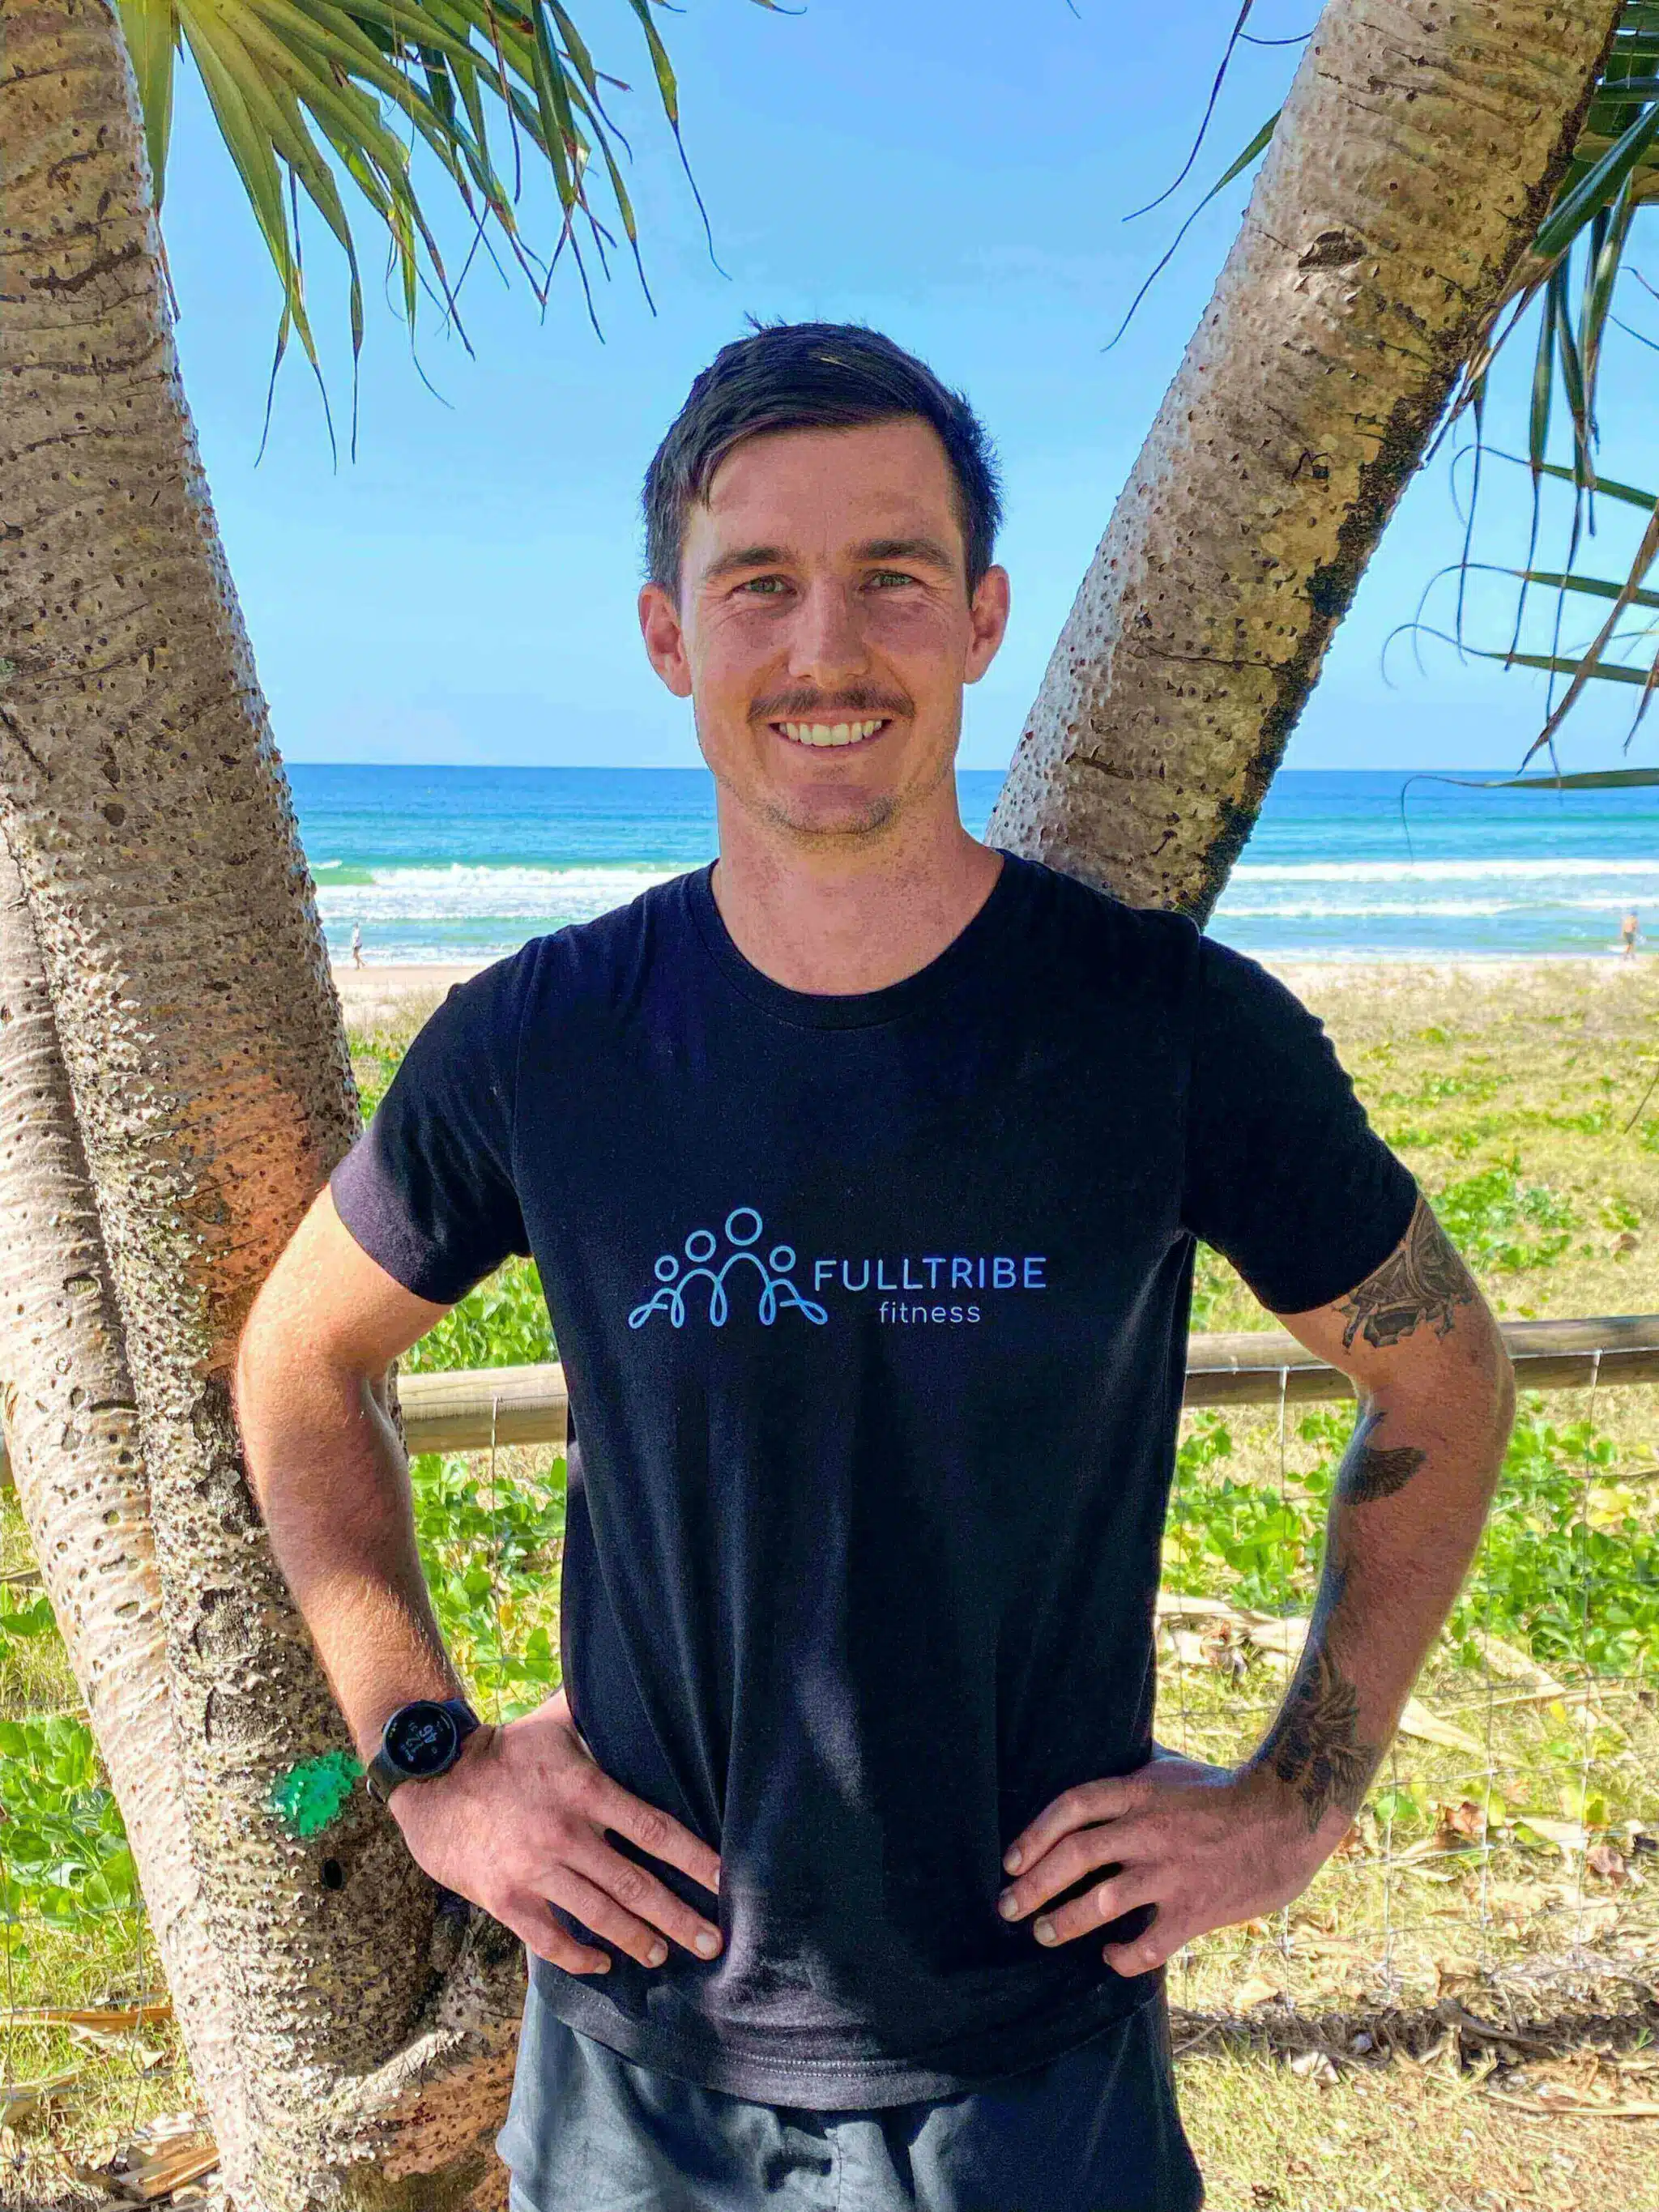 Jordan Pickard standing in front of a beach and palm trees. He has his hand on his hips and is wearing a black shirt with the Full Tribe Fitness logo on the front